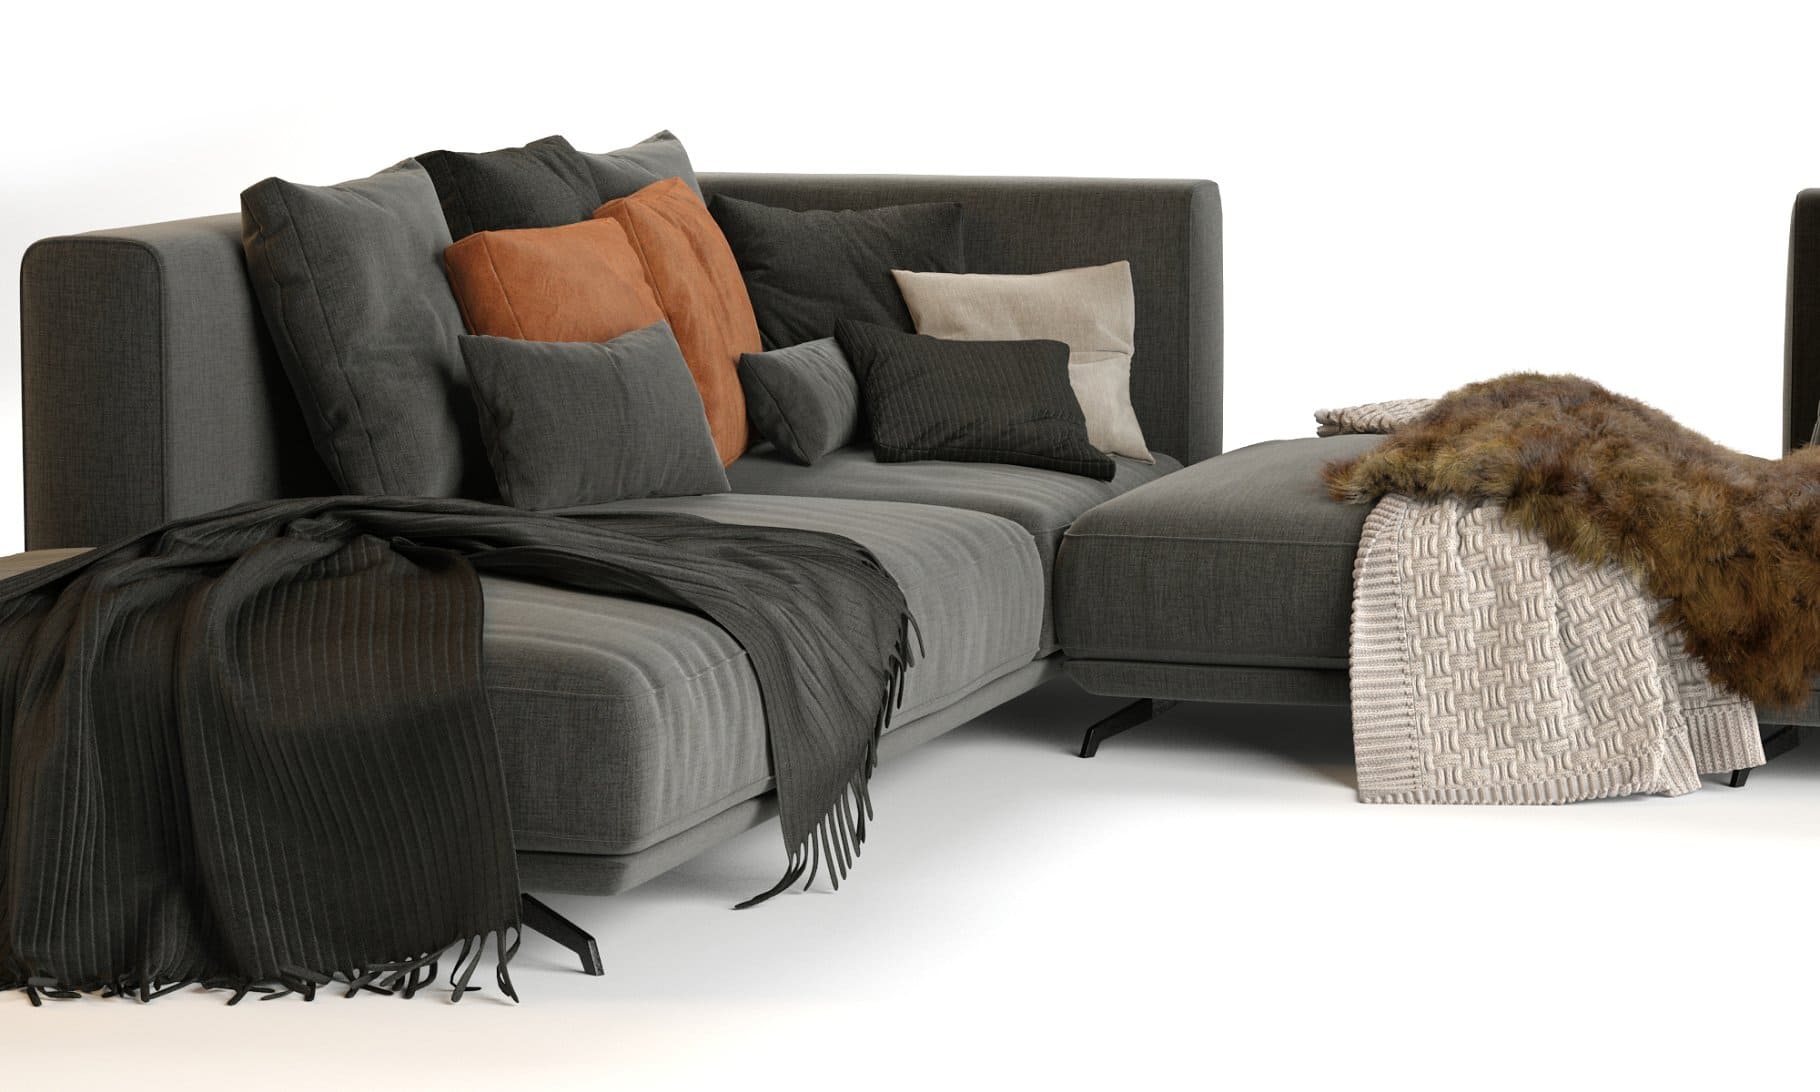 Knitted blankets and blankets made of fur and fabric lie on the Dalton Sofa by Ditre Italia.